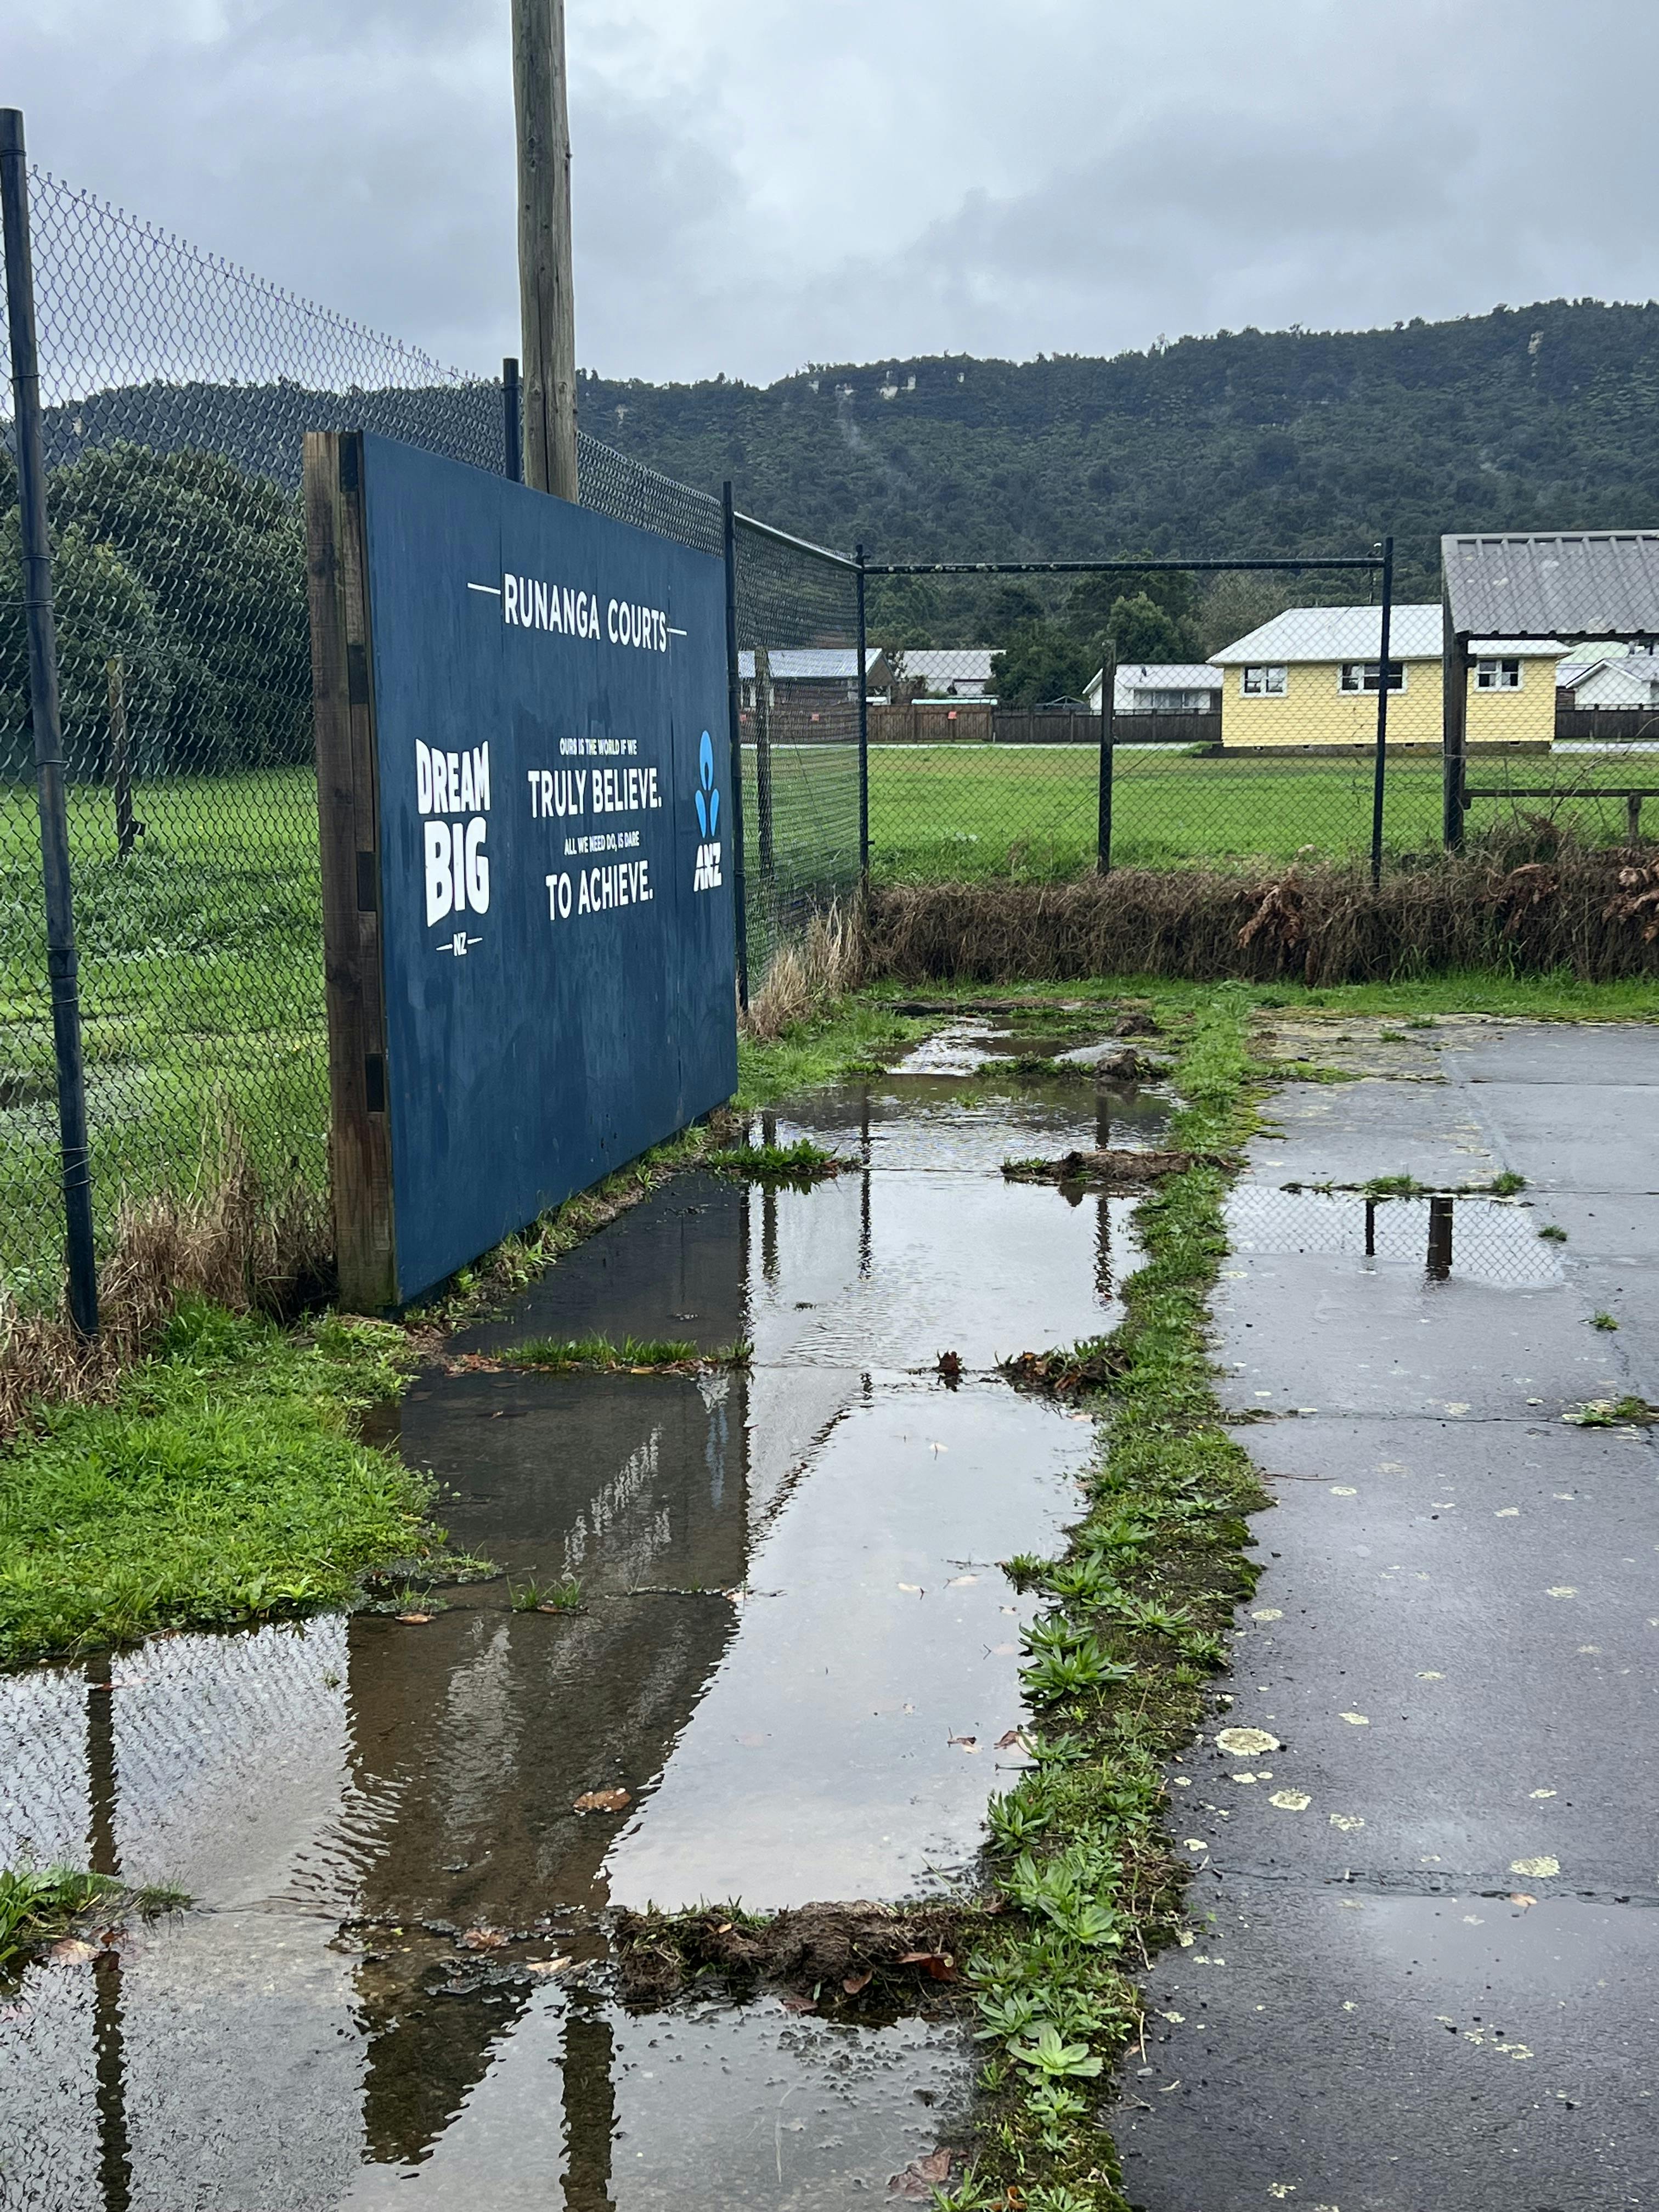 The Tennis Court was often flooded as drainage was being clogged with weeds and dirt